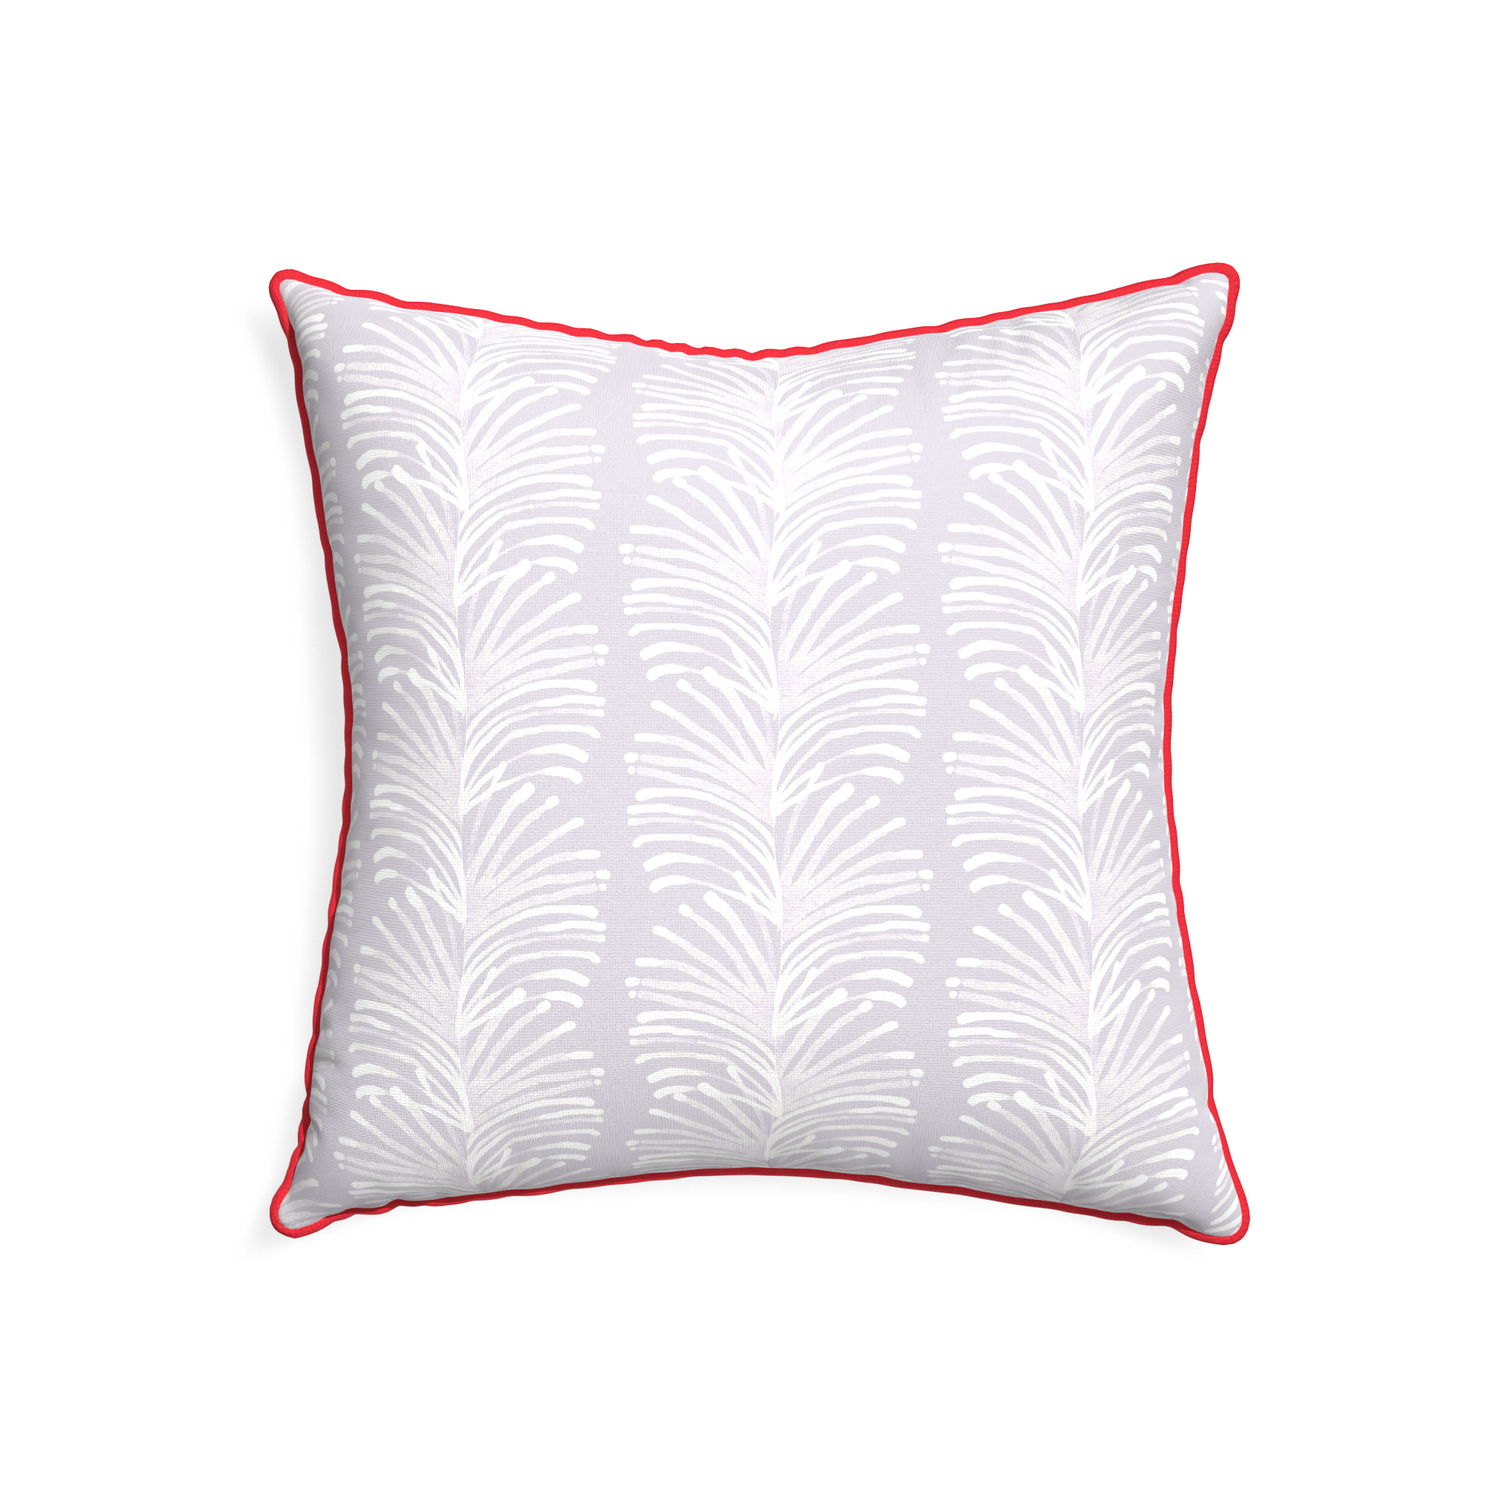 22-square emma lavender custom pillow with cherry piping on white background